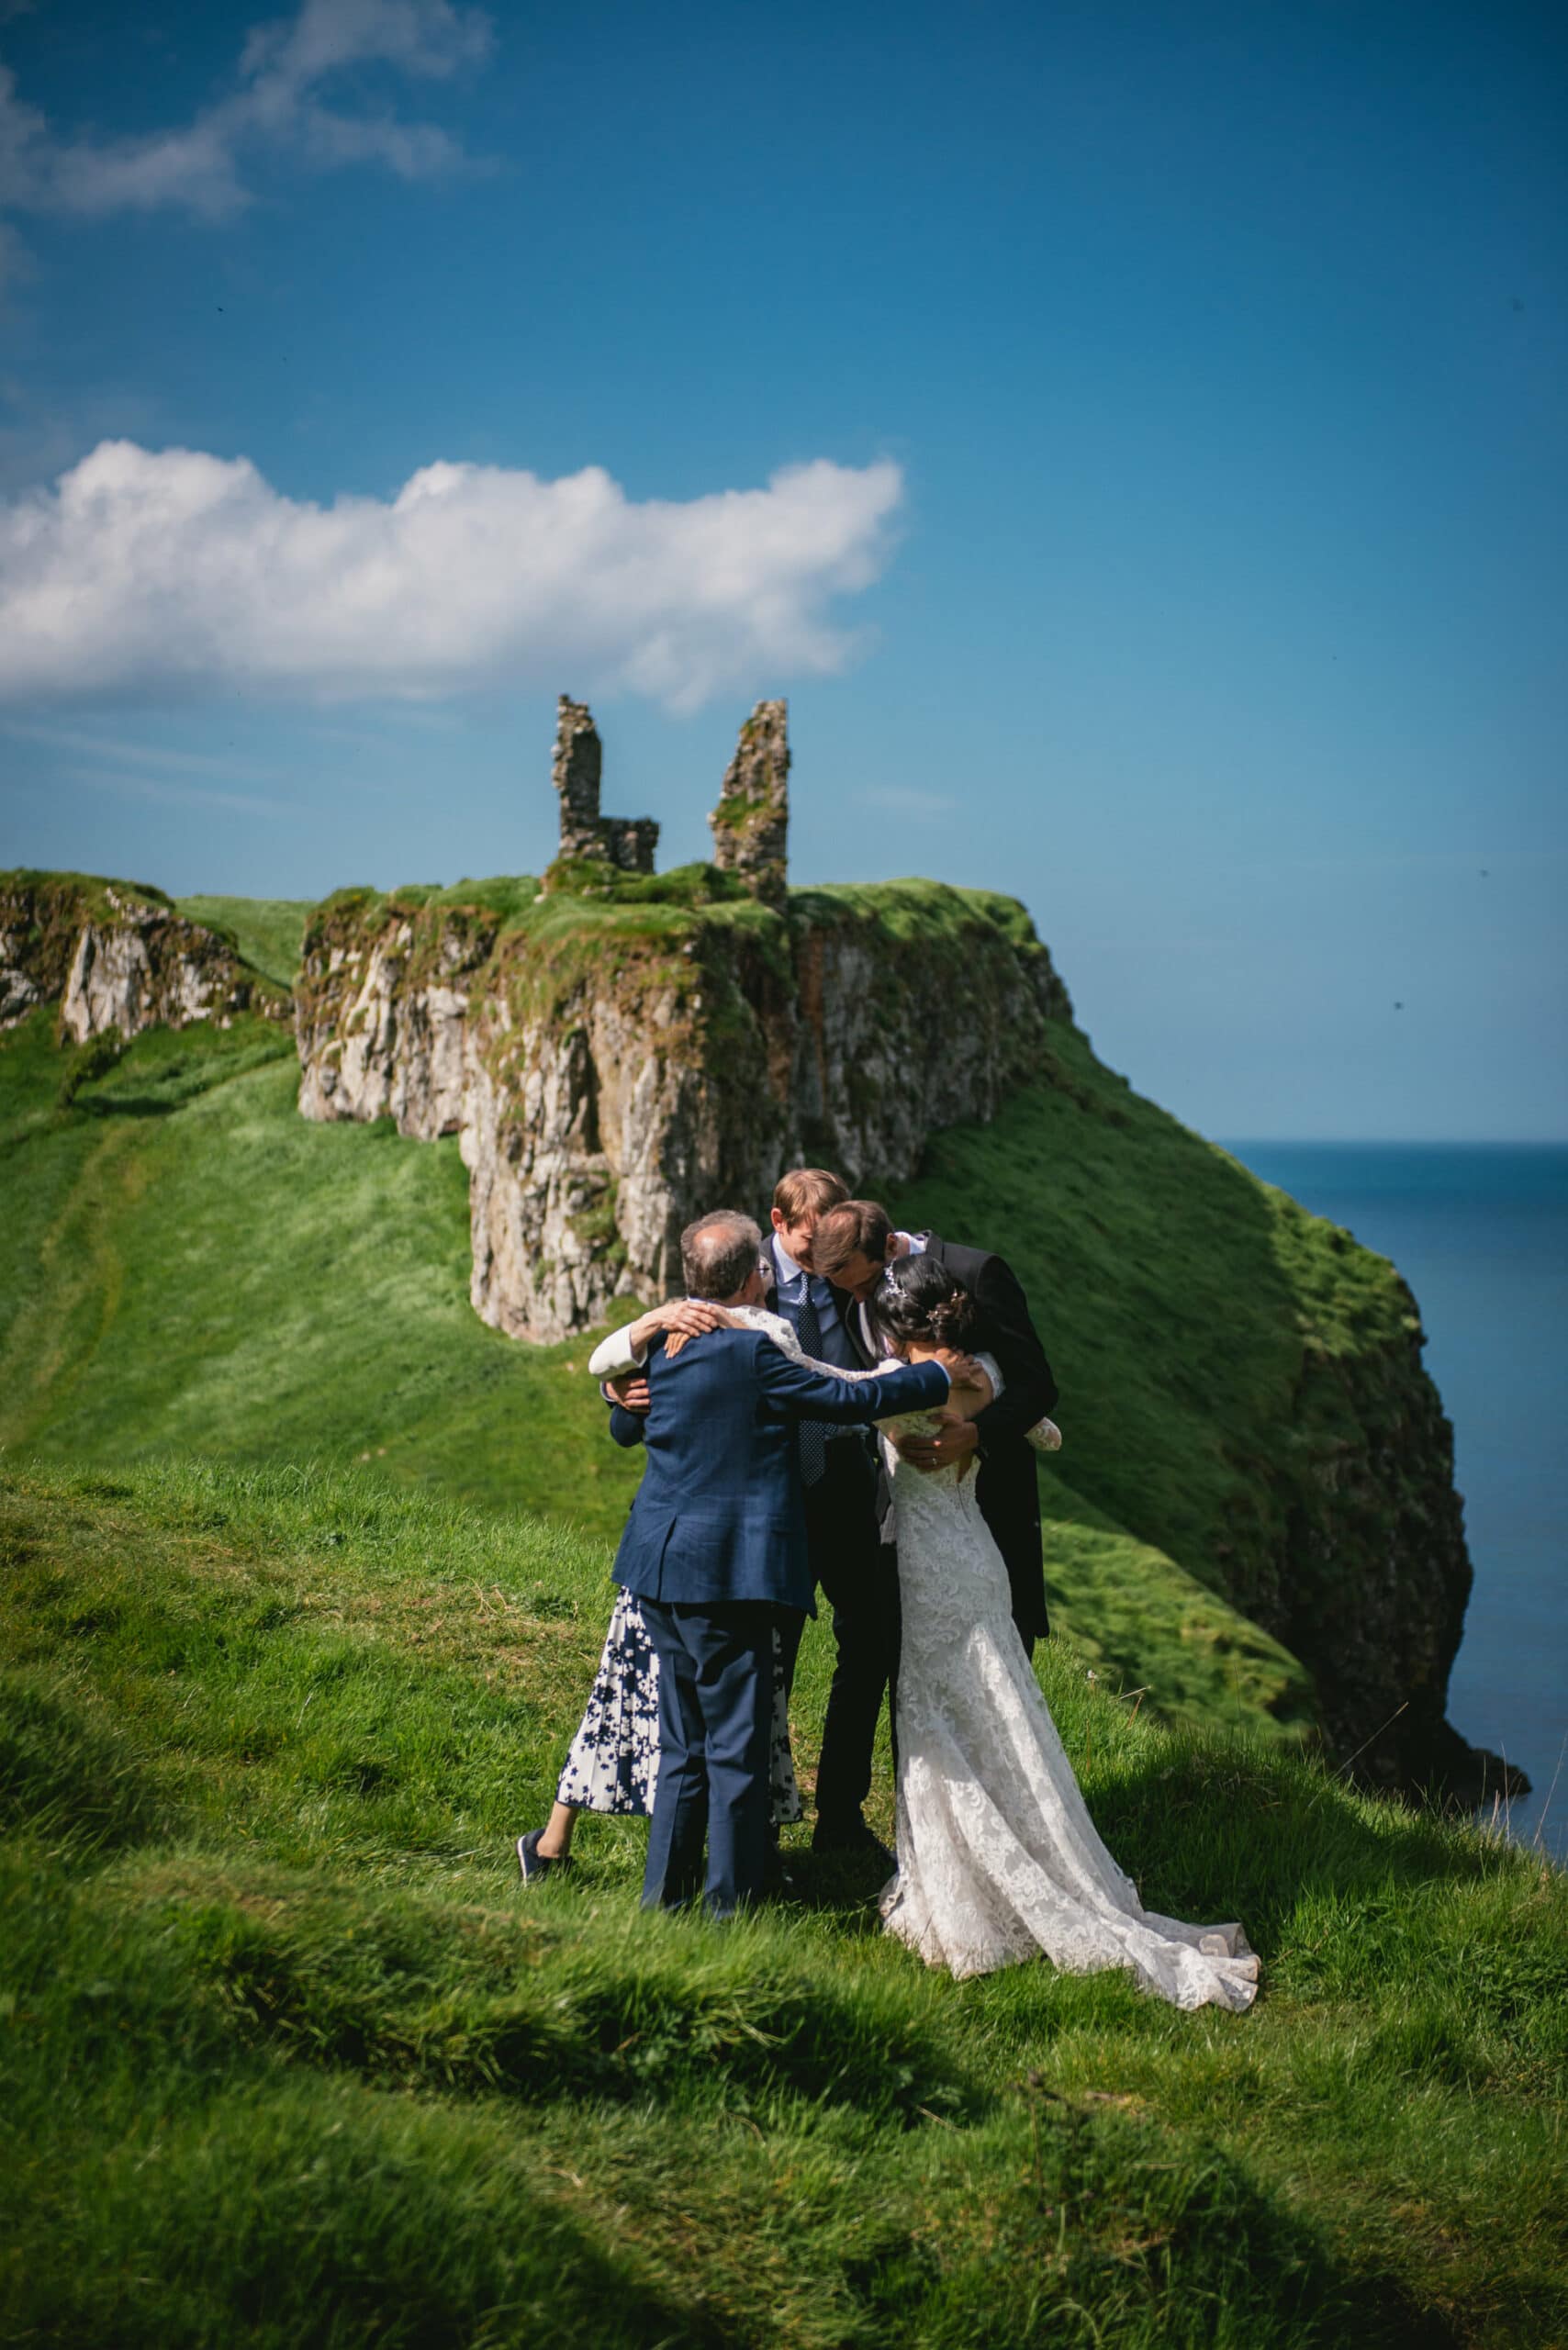 The couple's loving embrace, framed by the majestic architecture of the castle during their Northern Ireland elopement.